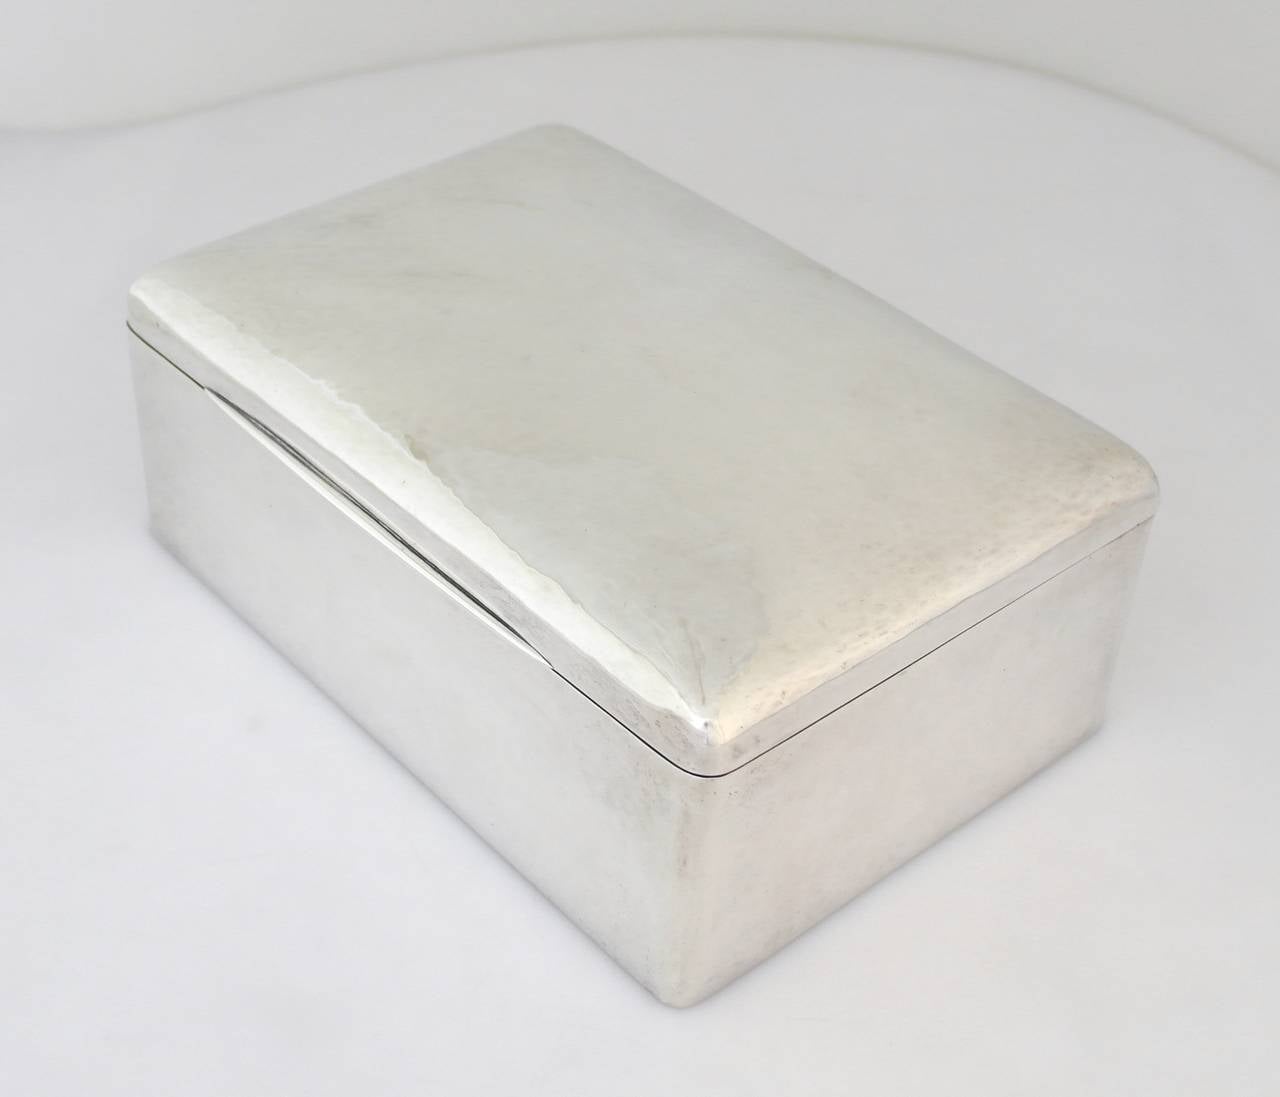 American Museum Quality Richard Dimes Boston Large Hand-Wrought Sterling Silver Box 1915